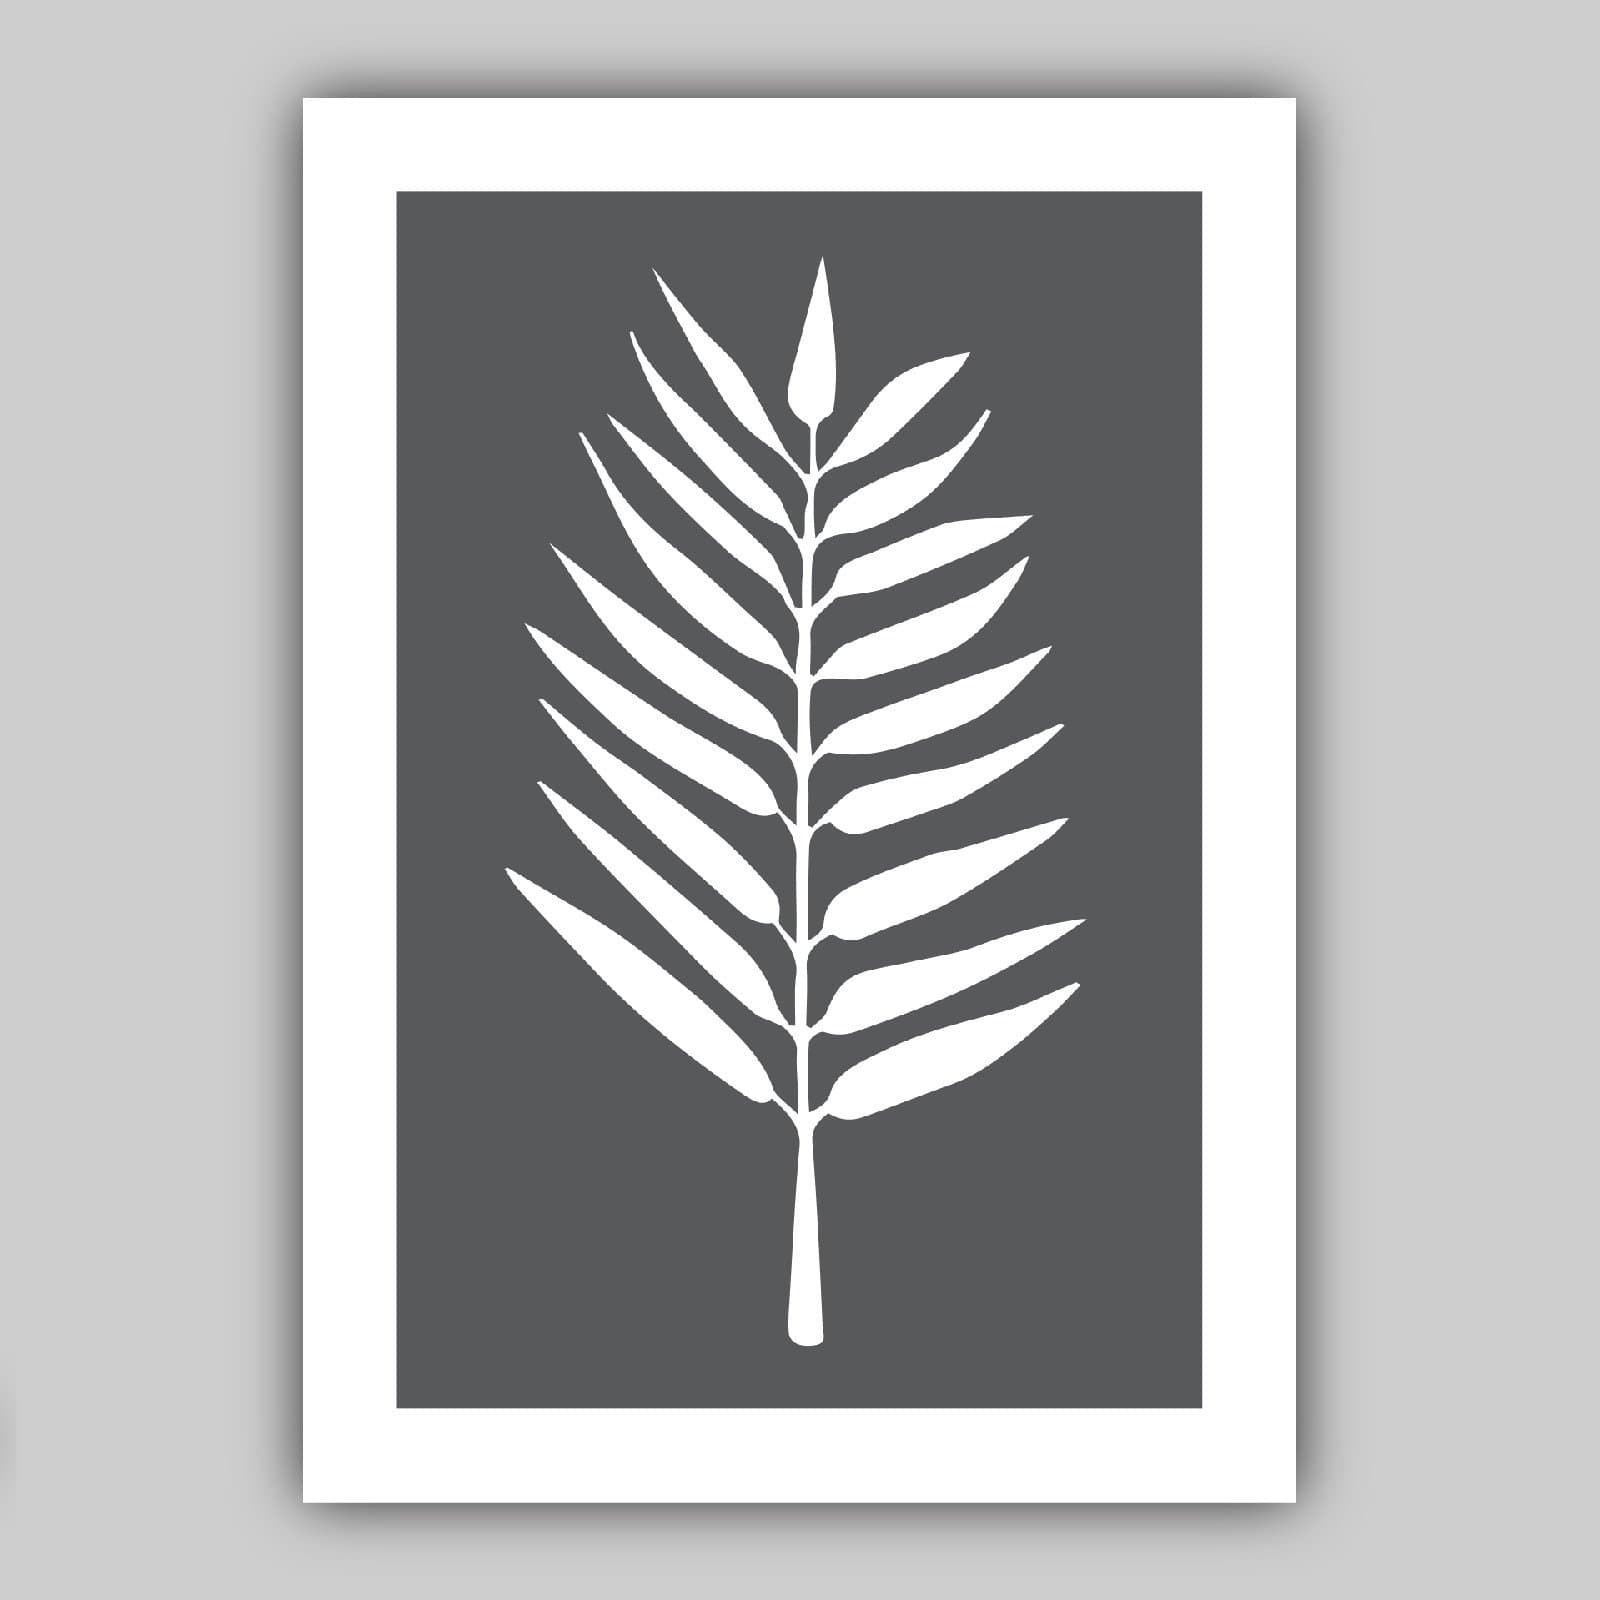 Set of 3 Duck Egg Blue Grey and White Gallery Wall Art Prints Tropical FERN Botanical Leaf Scandinavian Posters Minimalist Graphical Artwork